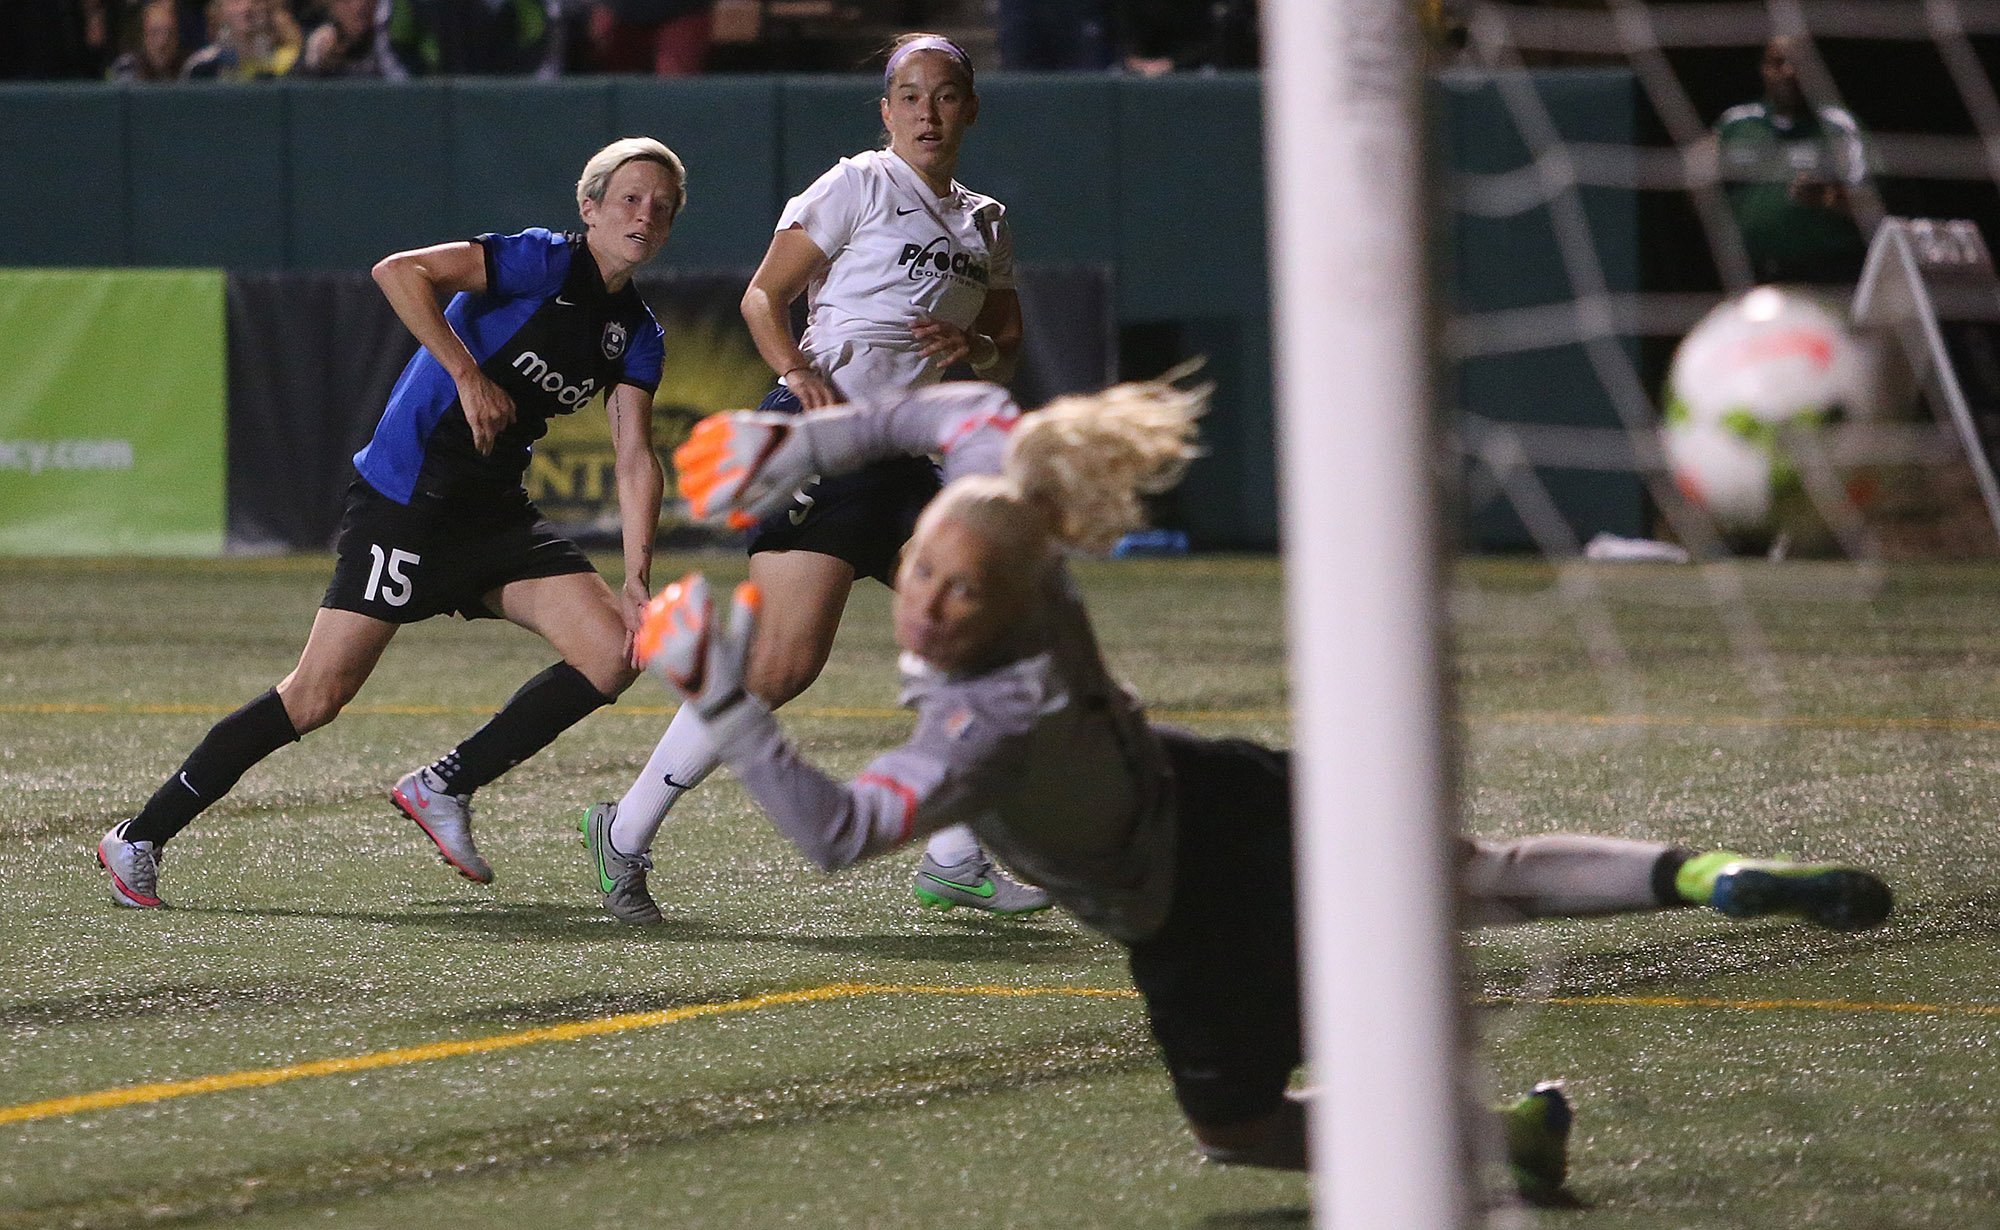  Seattle Reign's Megan Rapinoe score the second of what would be three goals during the National Women's Soccer League's Semifinal match between the Seattle Reign and the Washington Spirit at Memorial Stadium in Seattle, Sunday, September 13, 2015. S